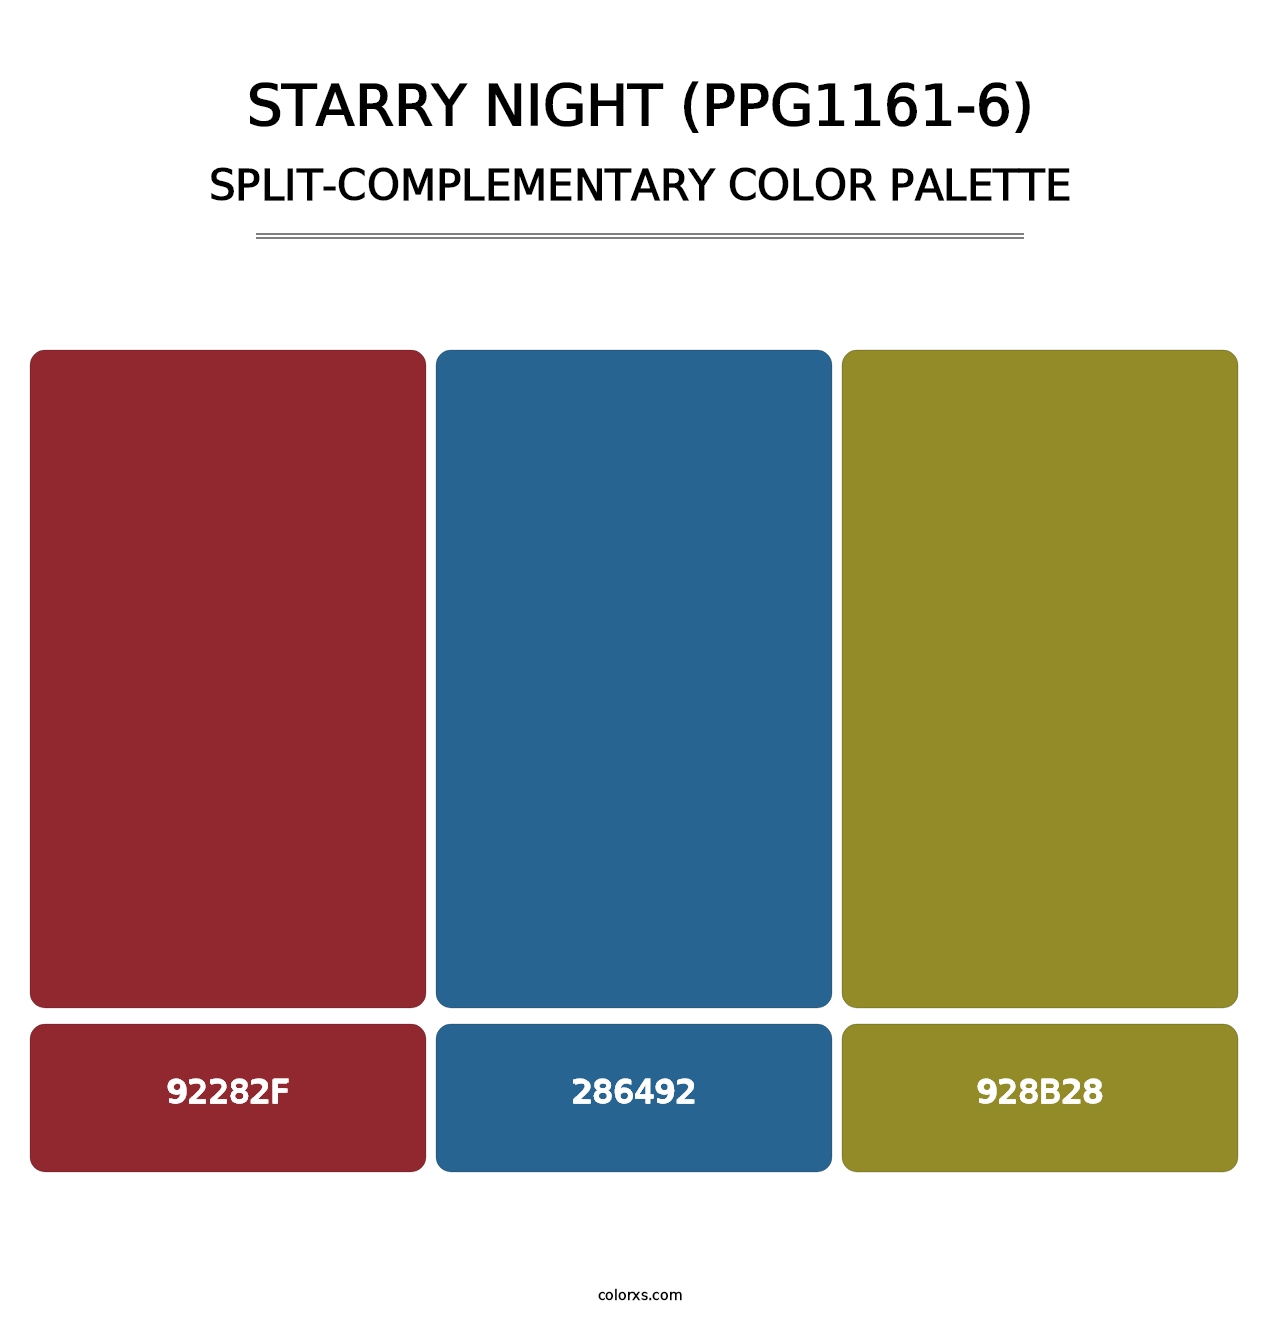 Starry Night (PPG1161-6) - Split-Complementary Color Palette